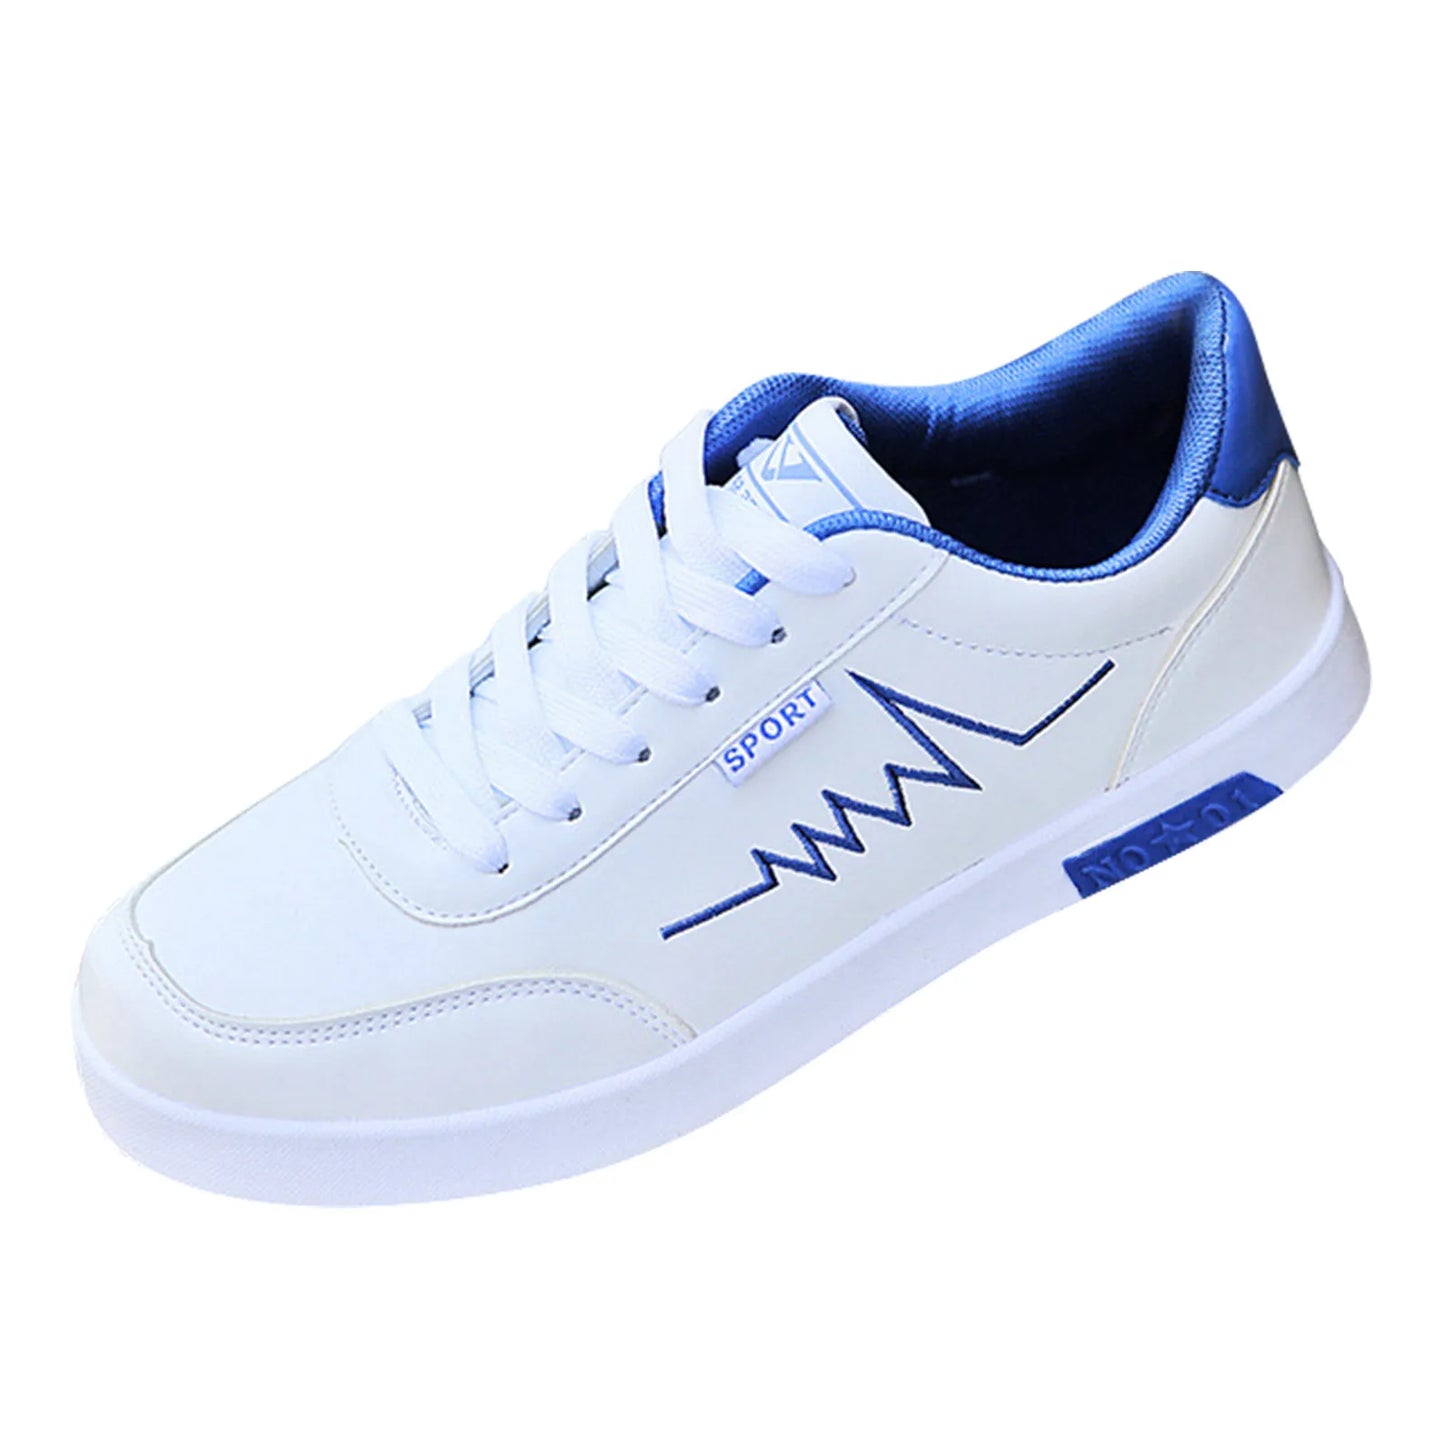 Men Sports Shoes Casual Trainer Sneakers Shoes/Flat Breathable Fabric Non-Slip Tennis Running